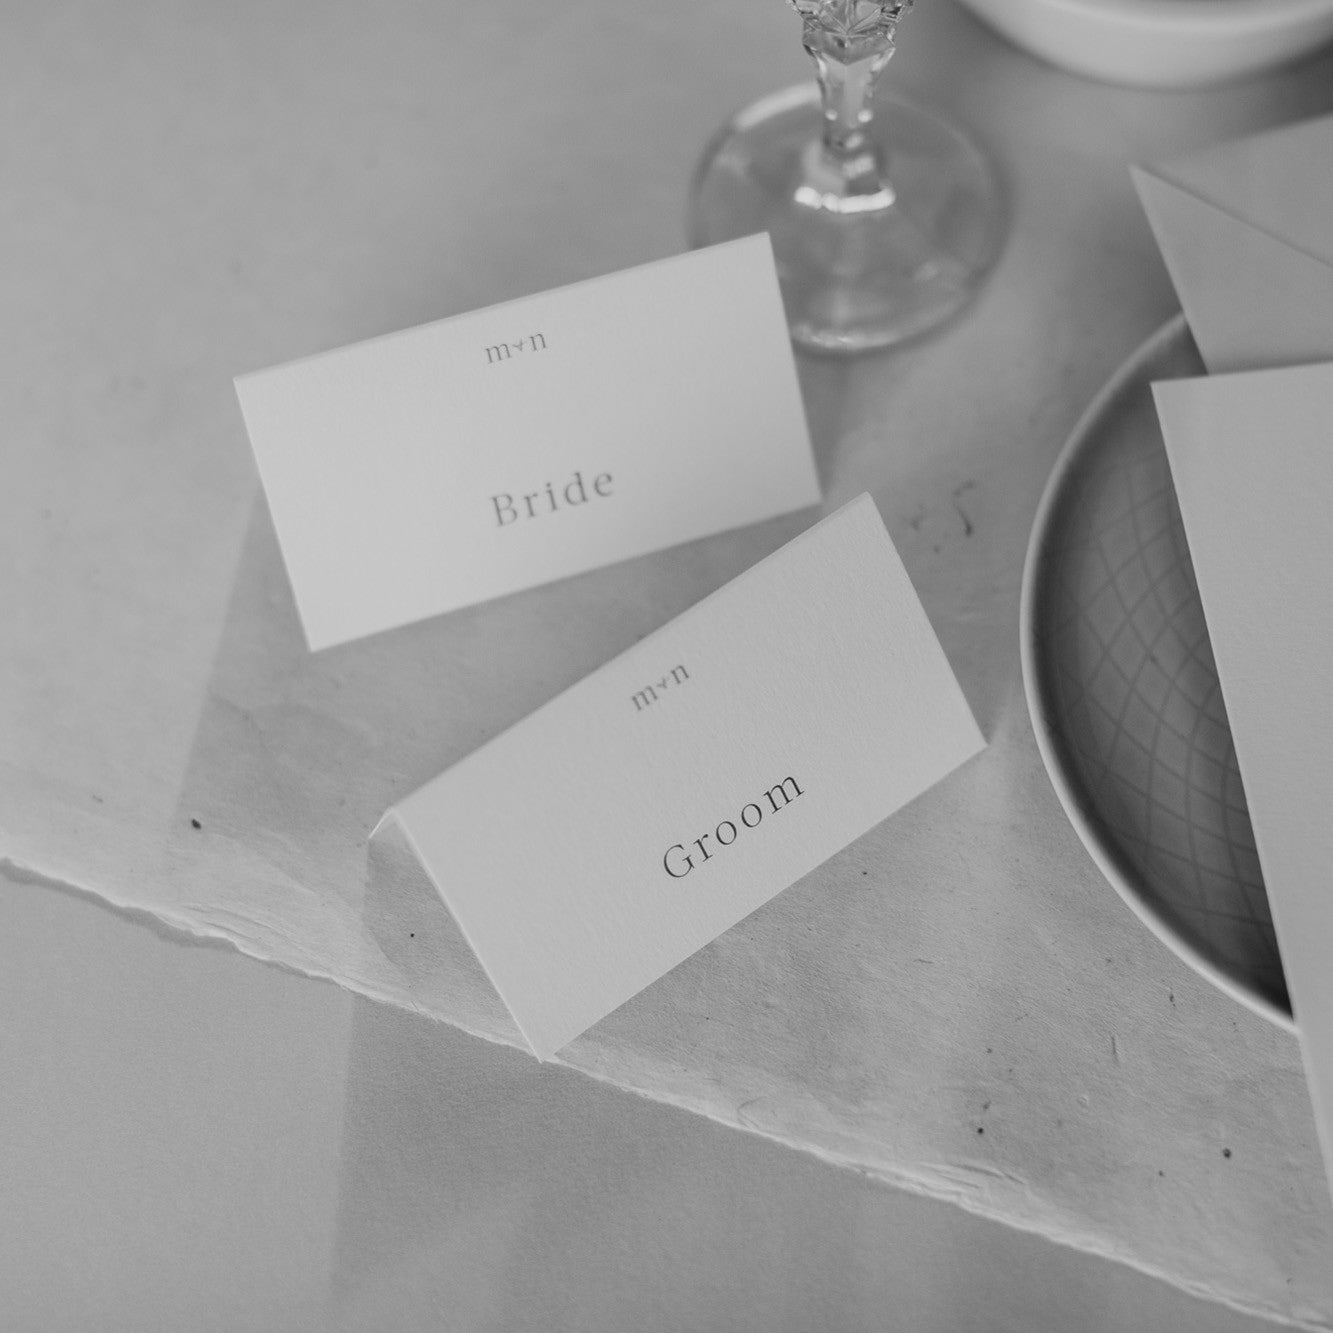 The Go-To Place Card